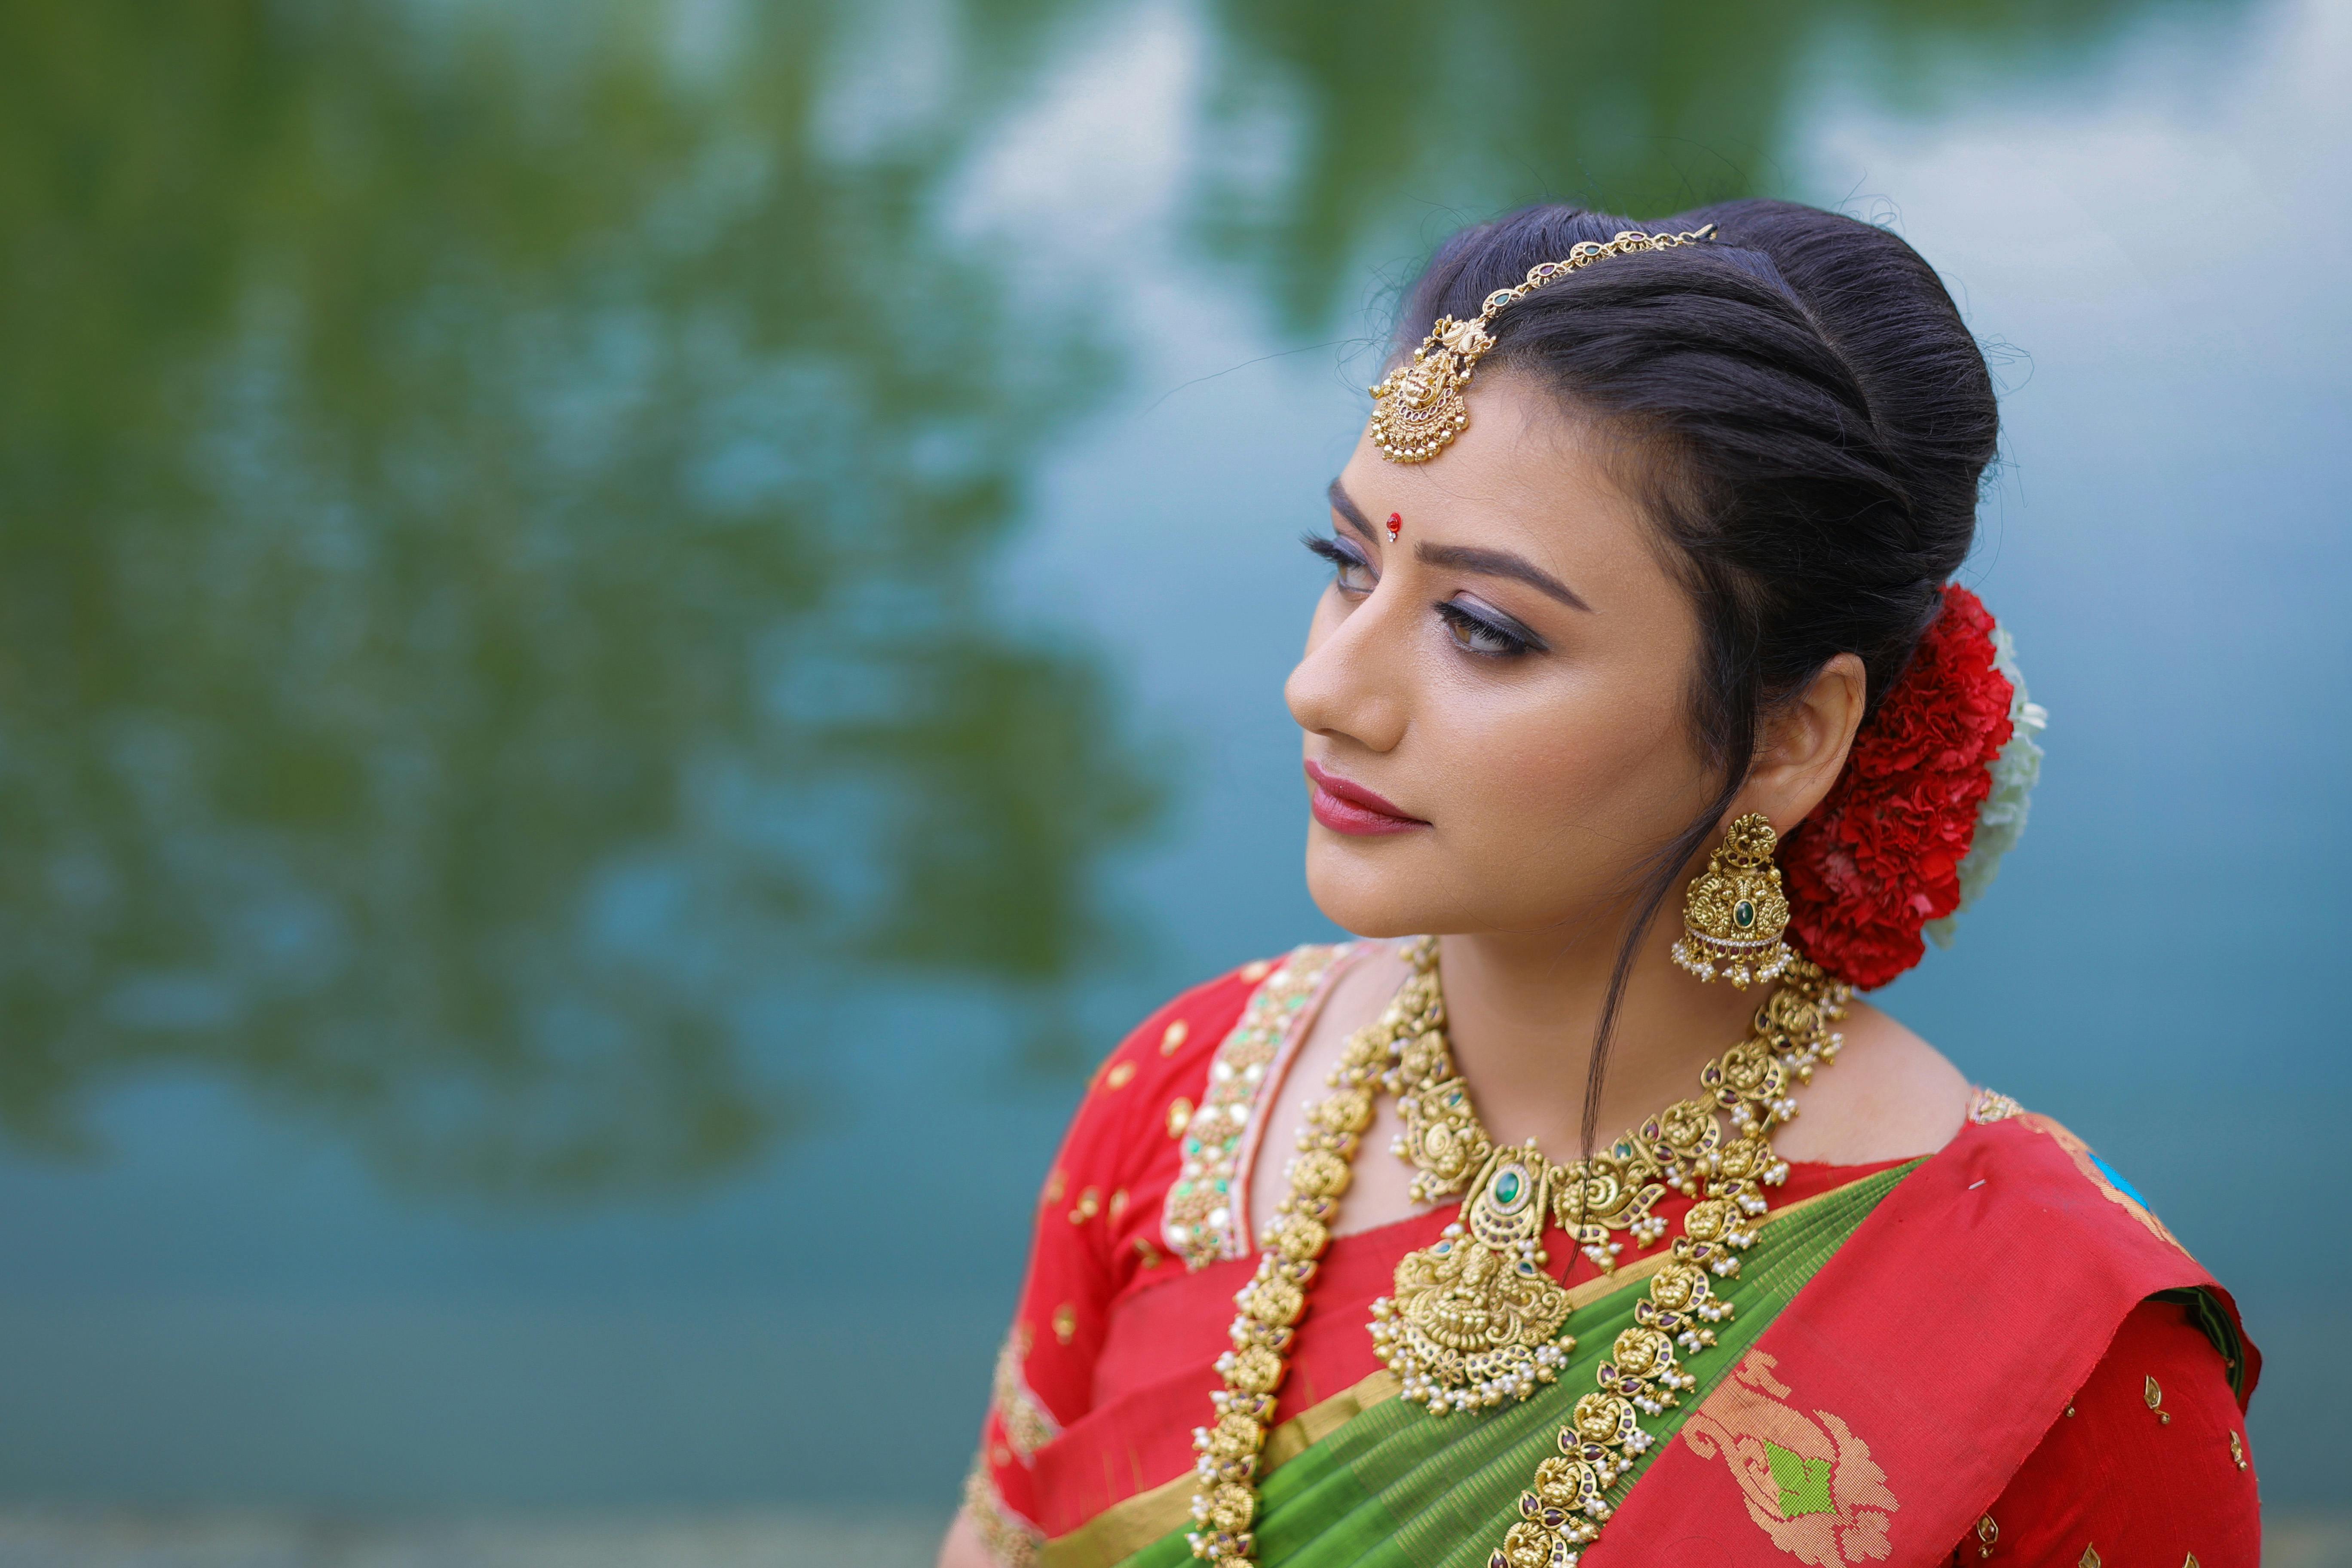 60+ Gorgeous South Indian Bridal Looks Who've Stolen Our Hearts!